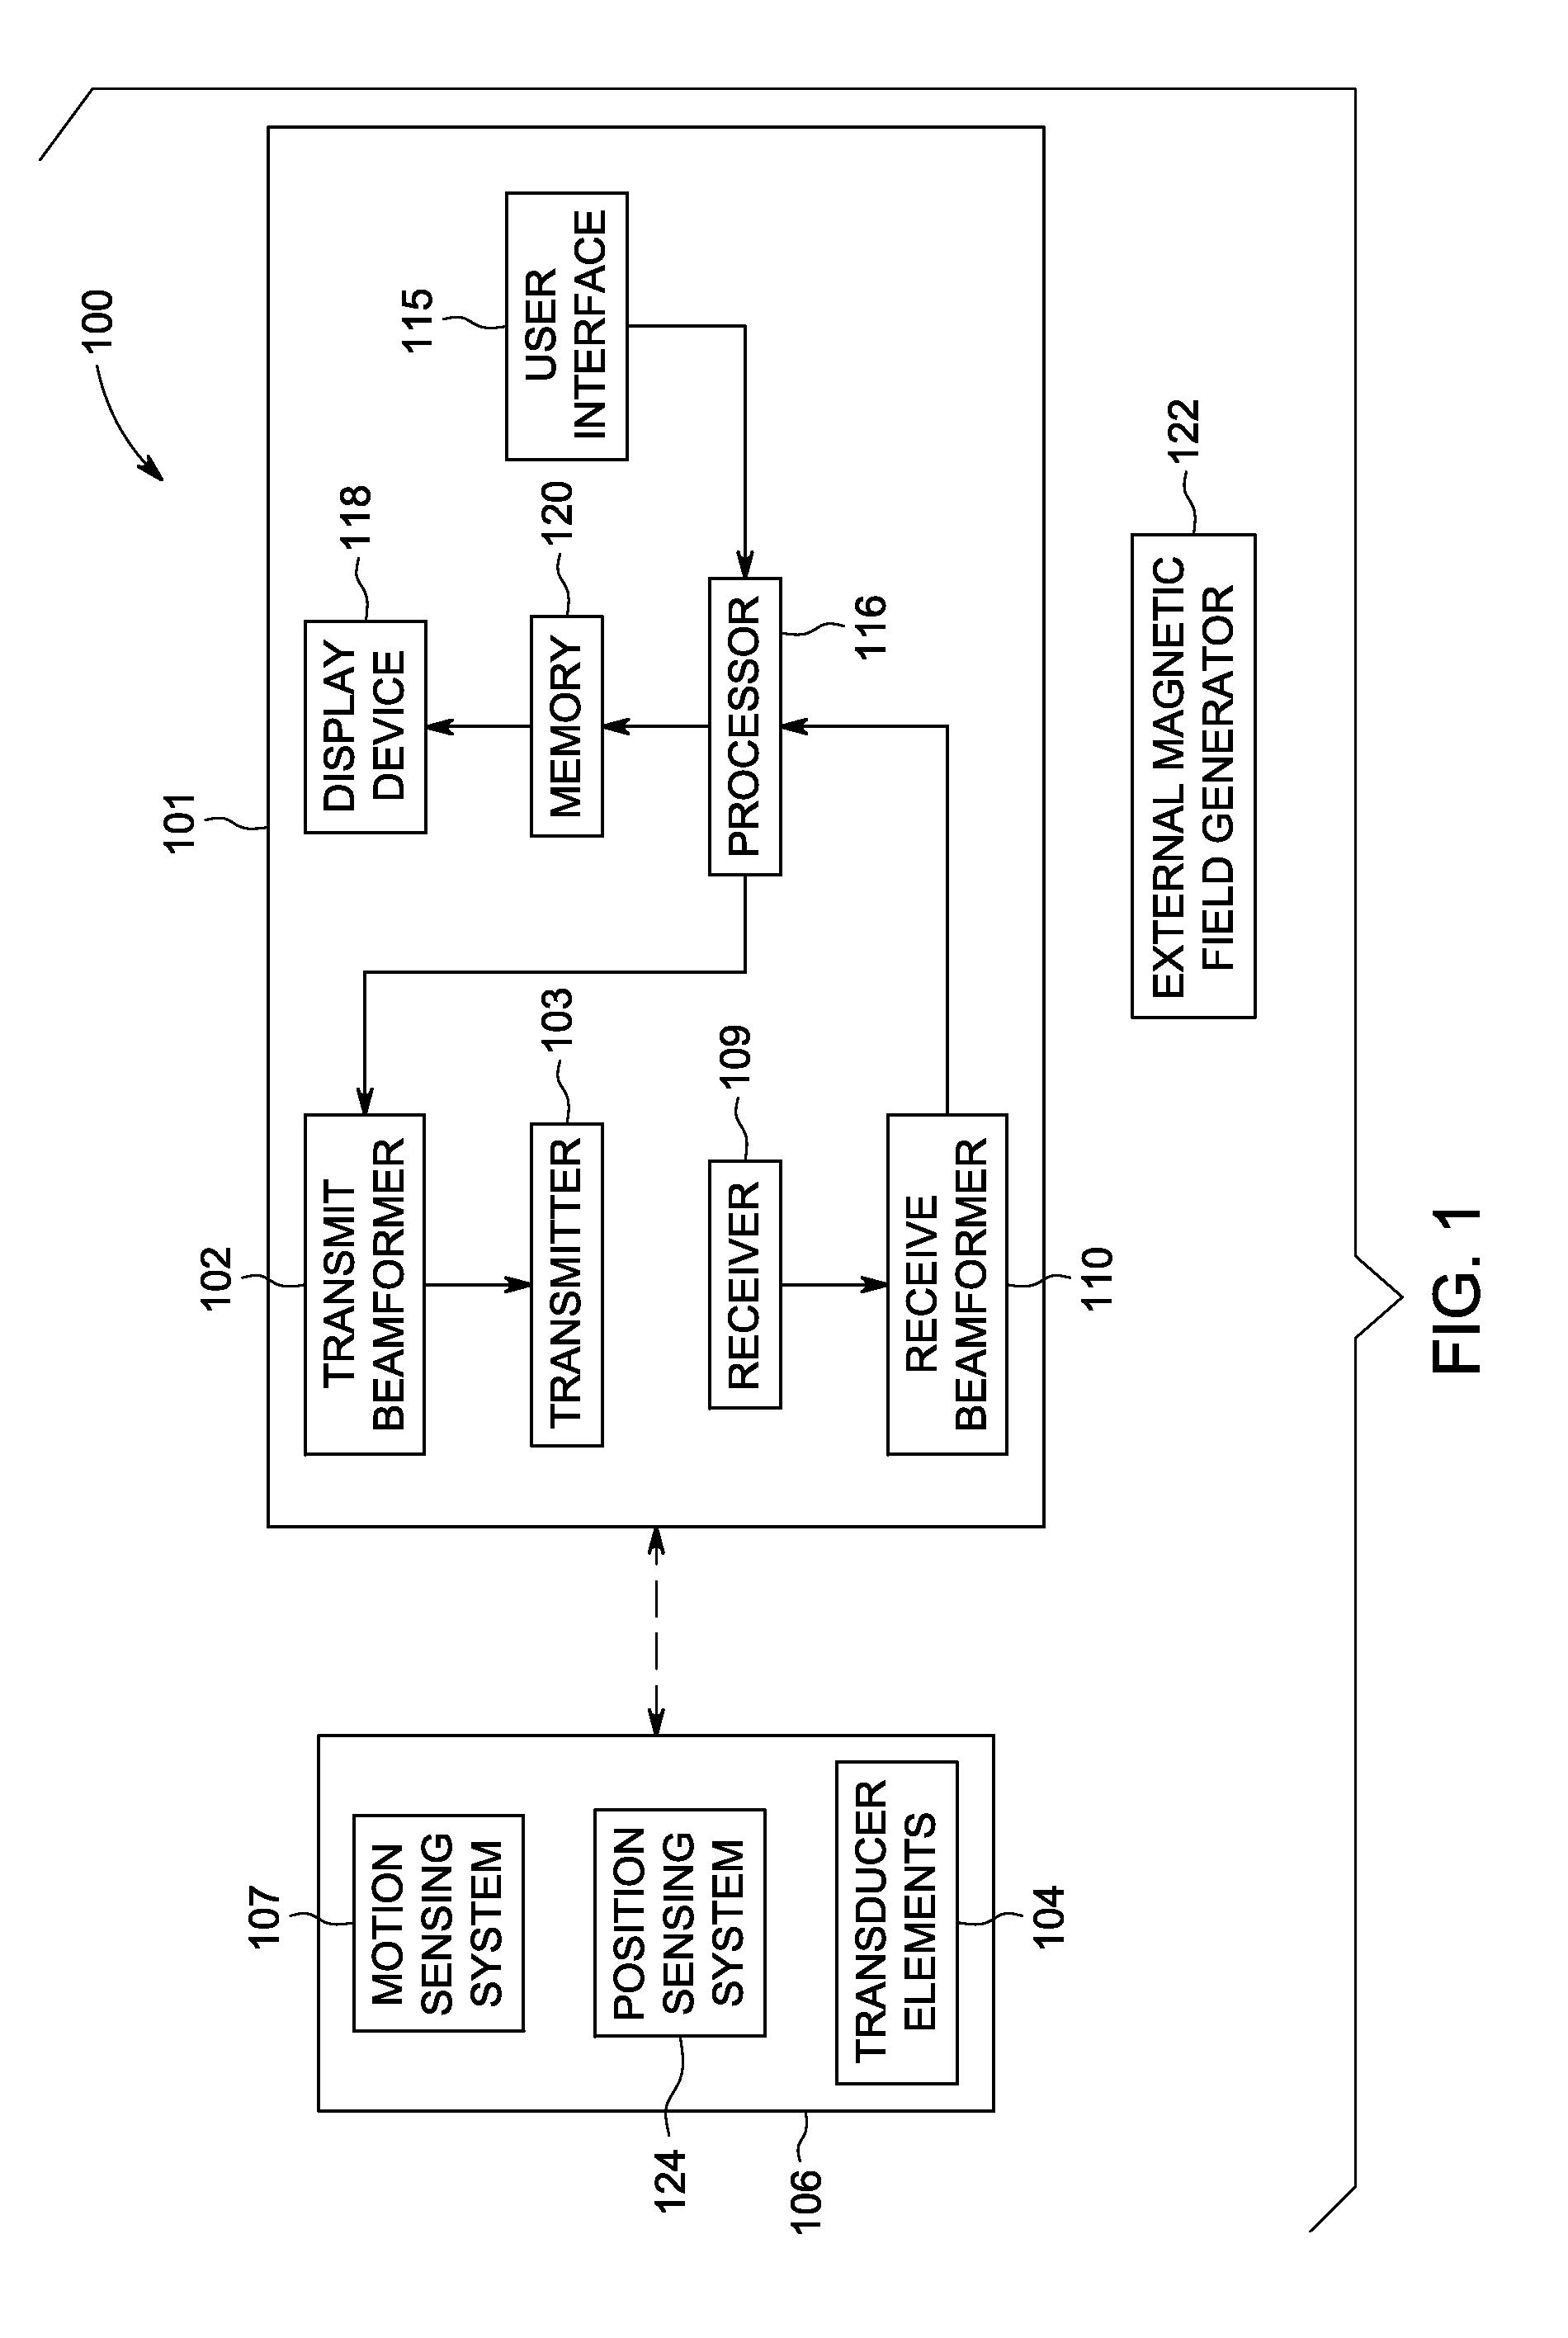 Ultrasound imaging system and method for drift compensation